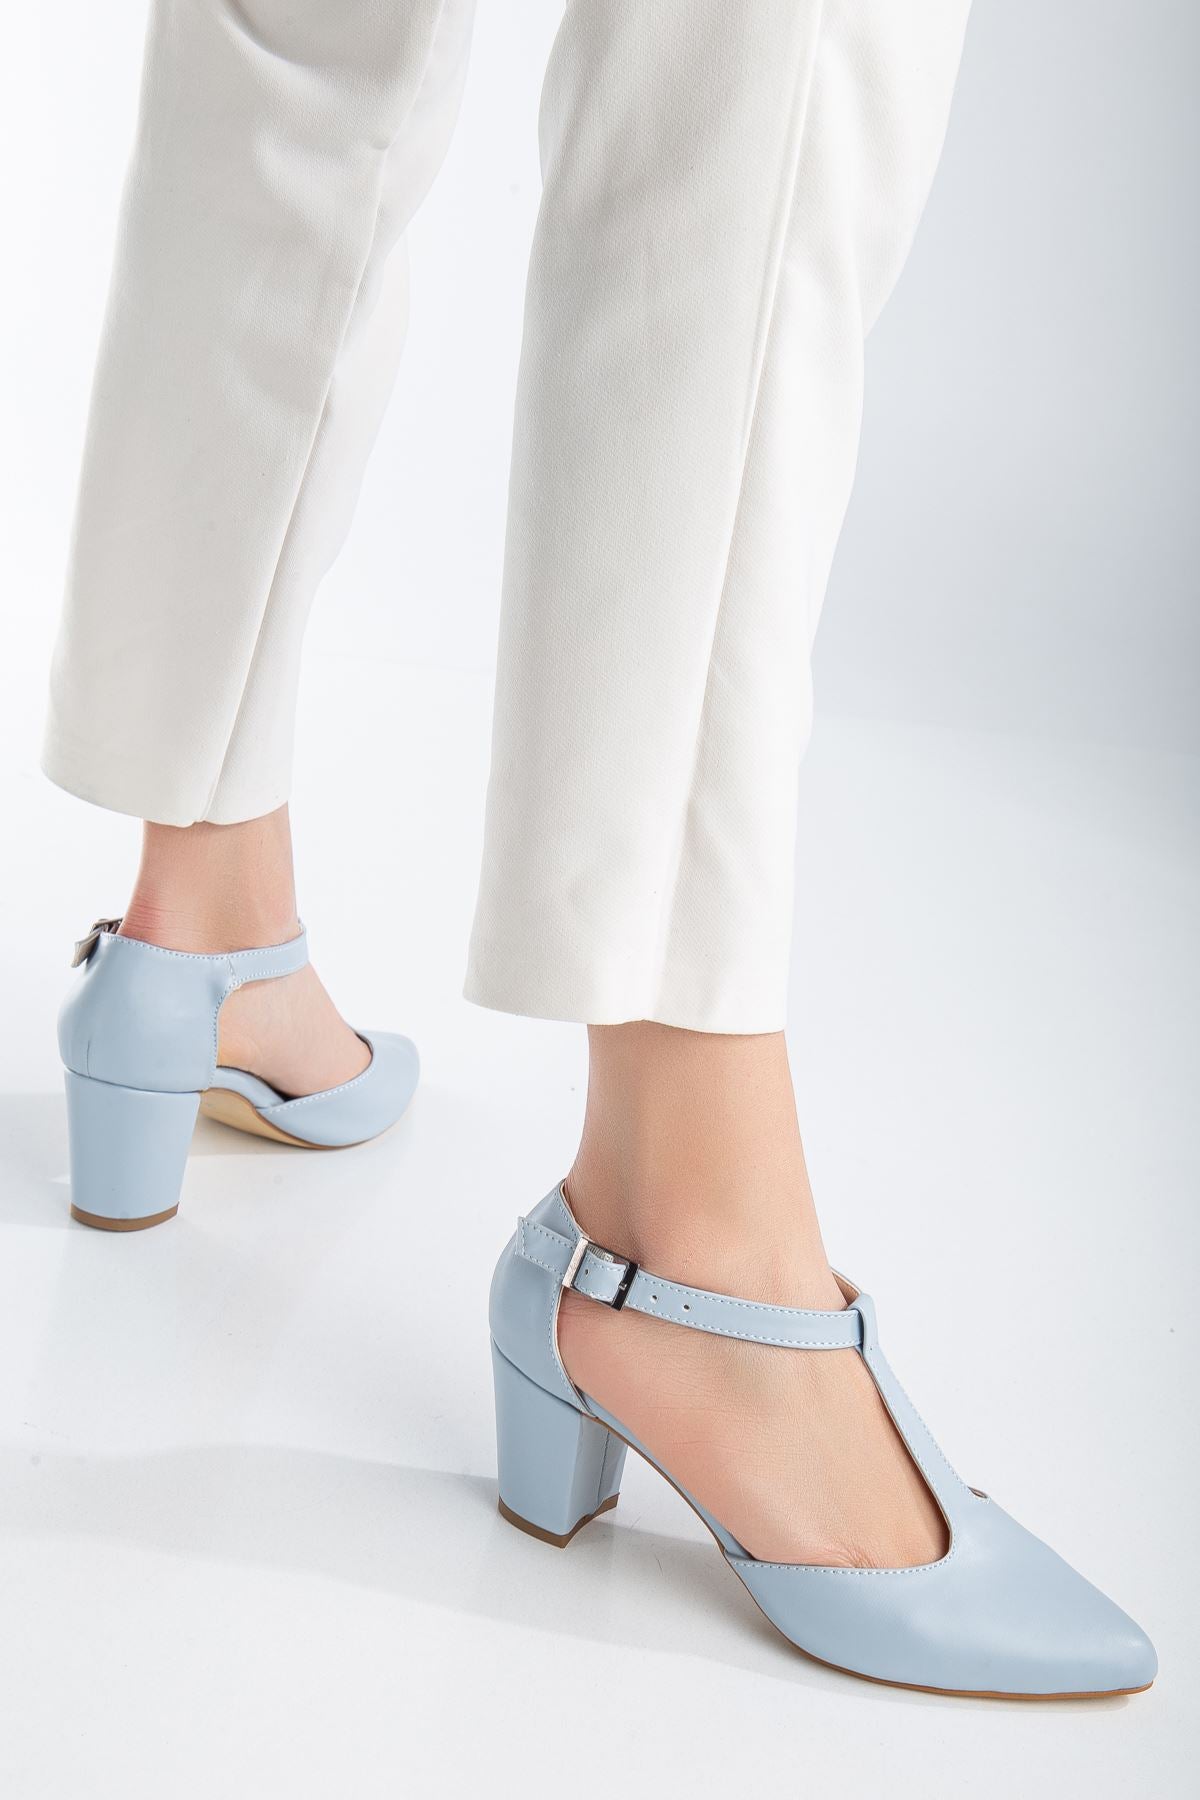 Niven Baby Blue Leather Heeled Women's Shoes - STREETMODE™